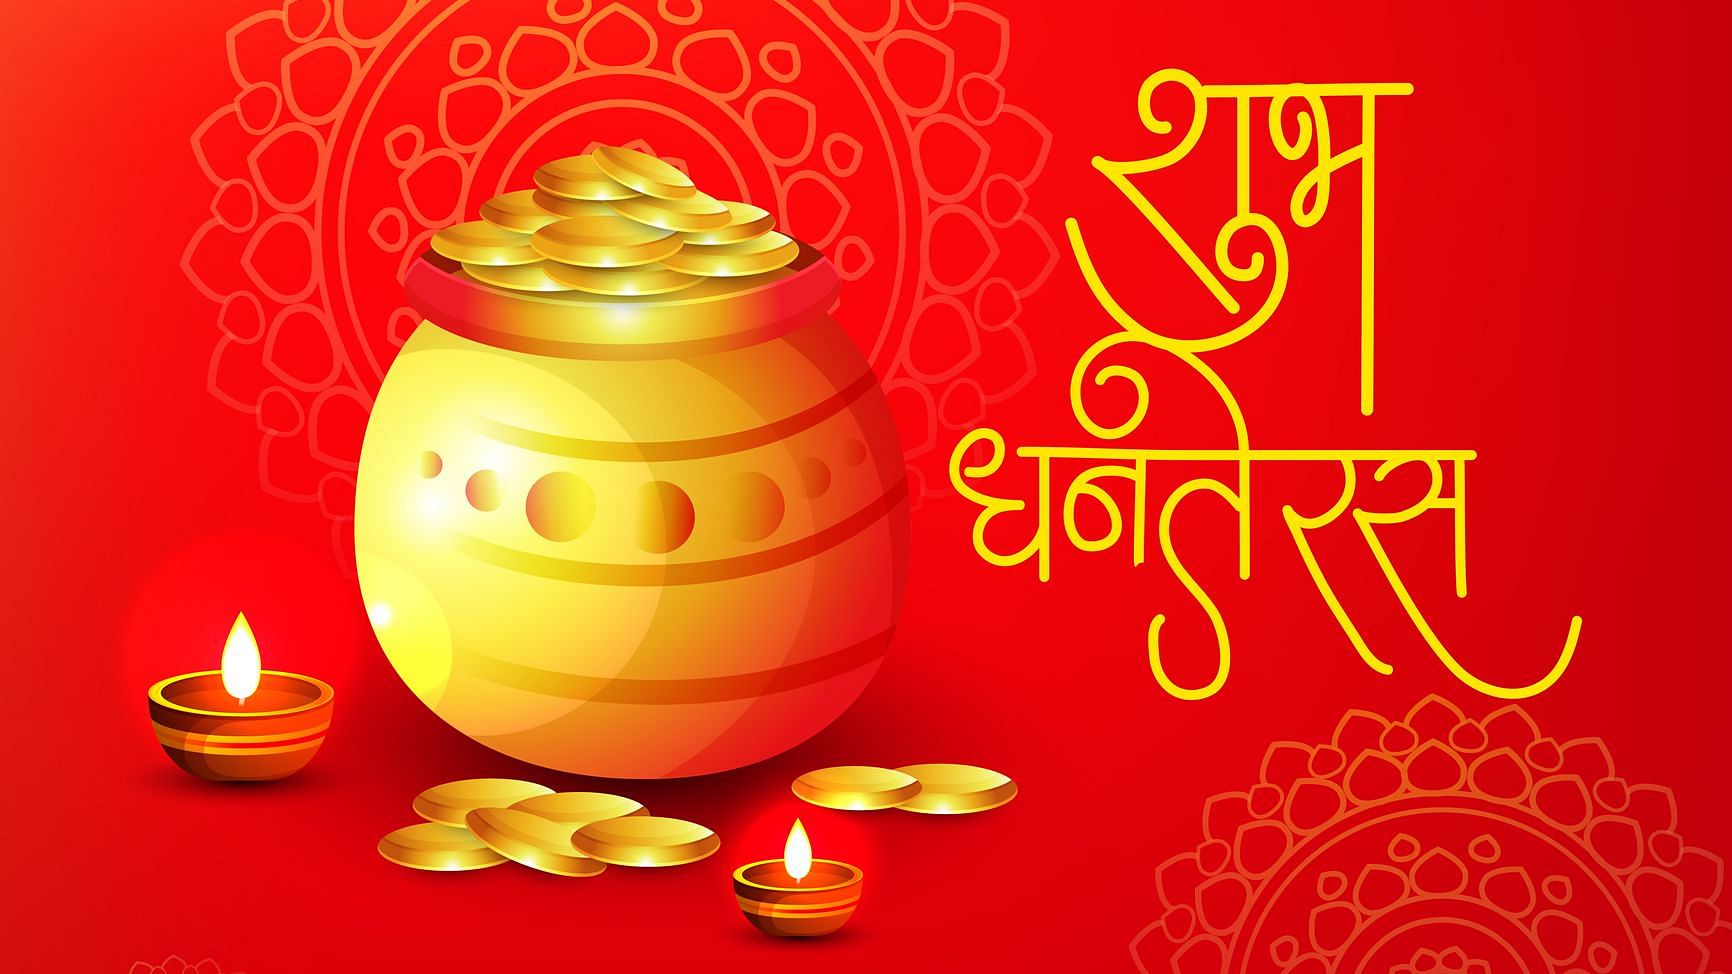 Happy Dhanteras 2021 : Dhanteras quotes, wishes, greetings and sms